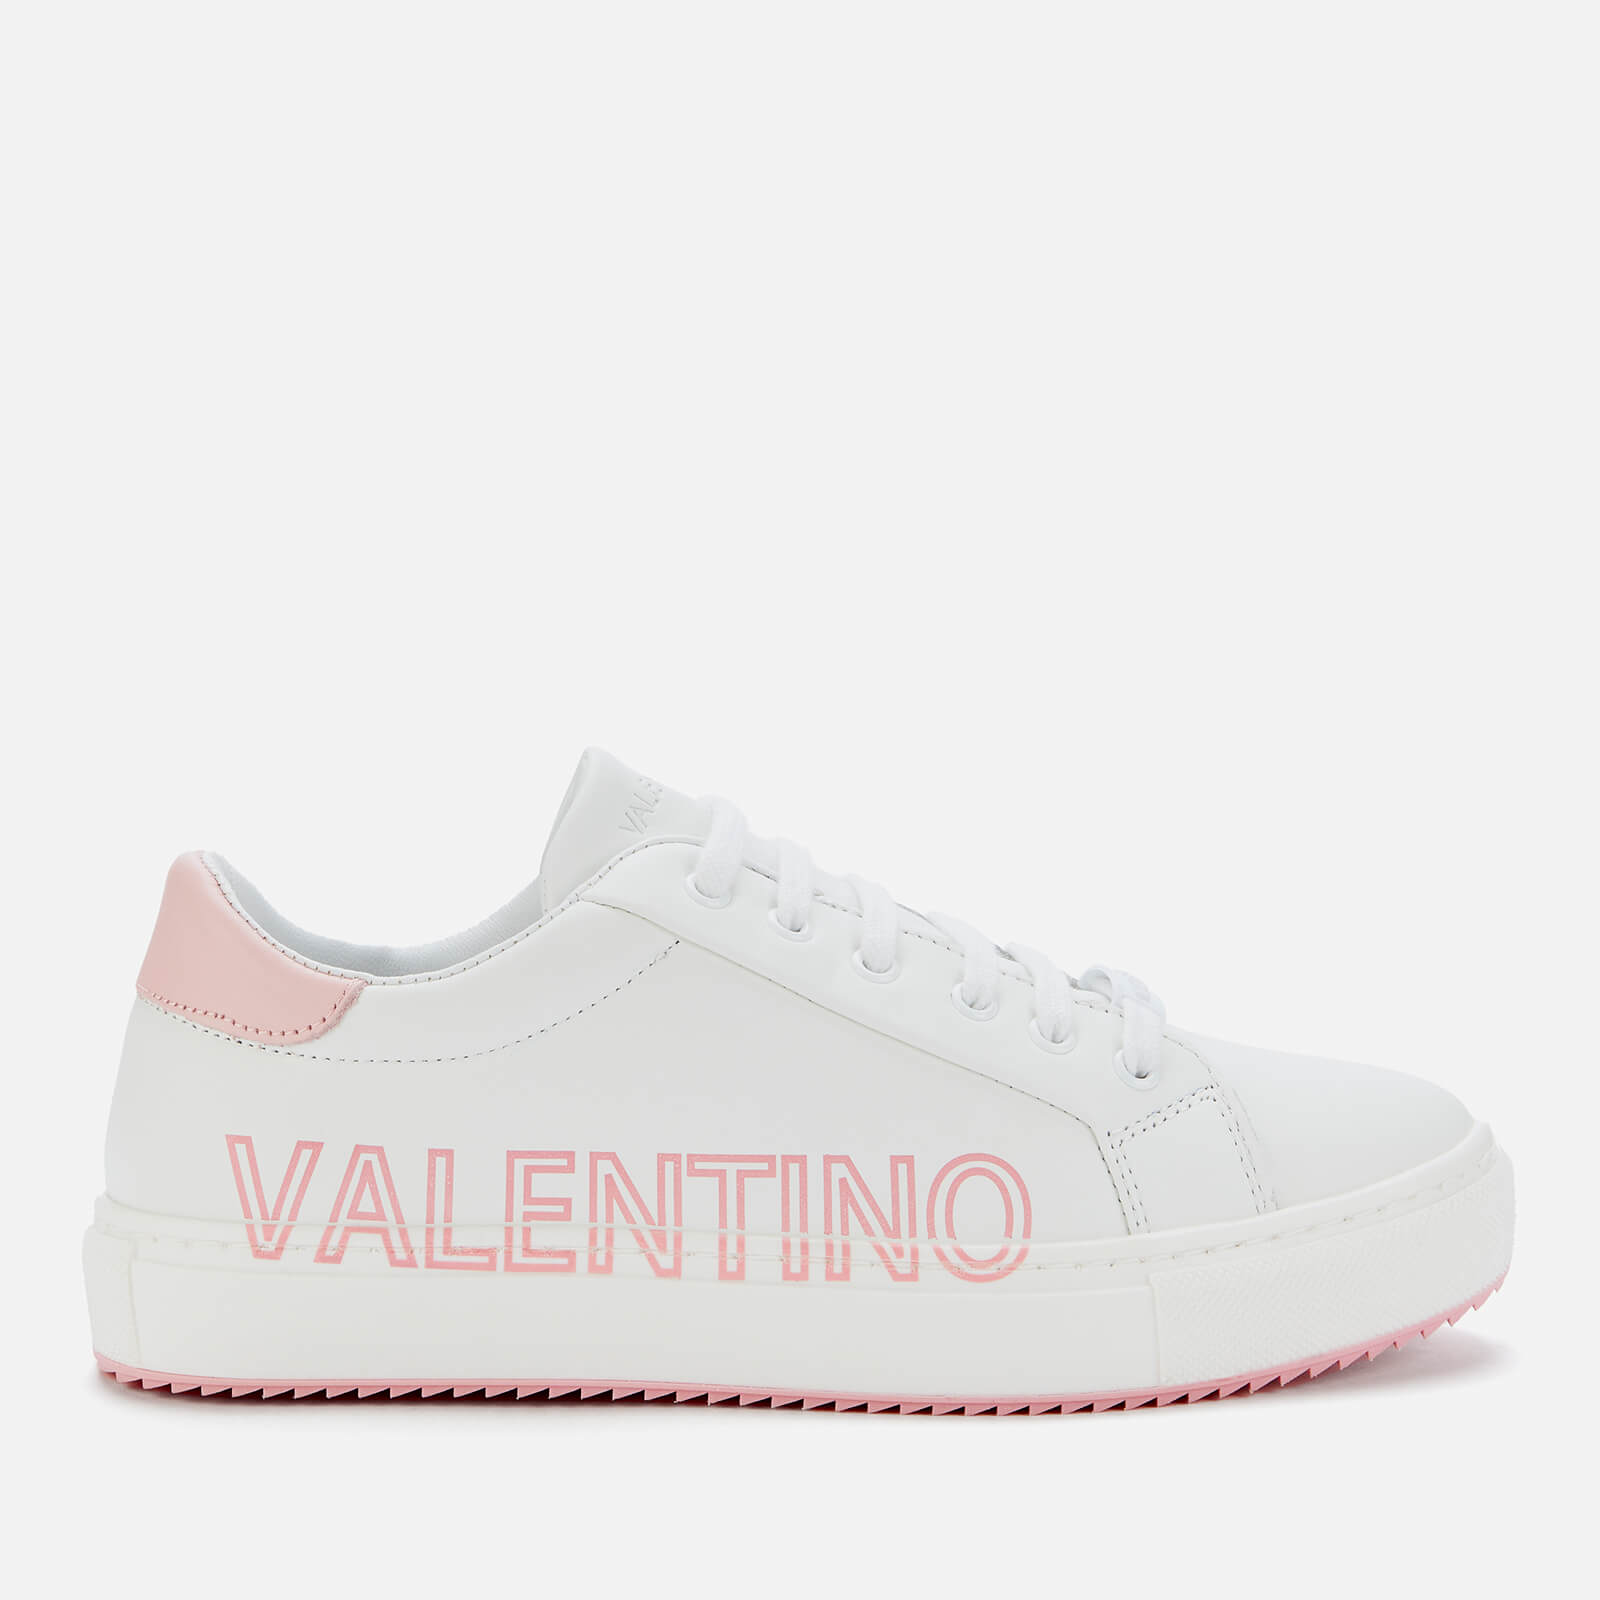 Valentino Shoes Women's Leather Low Top Trainers - White/Pink - UK 3